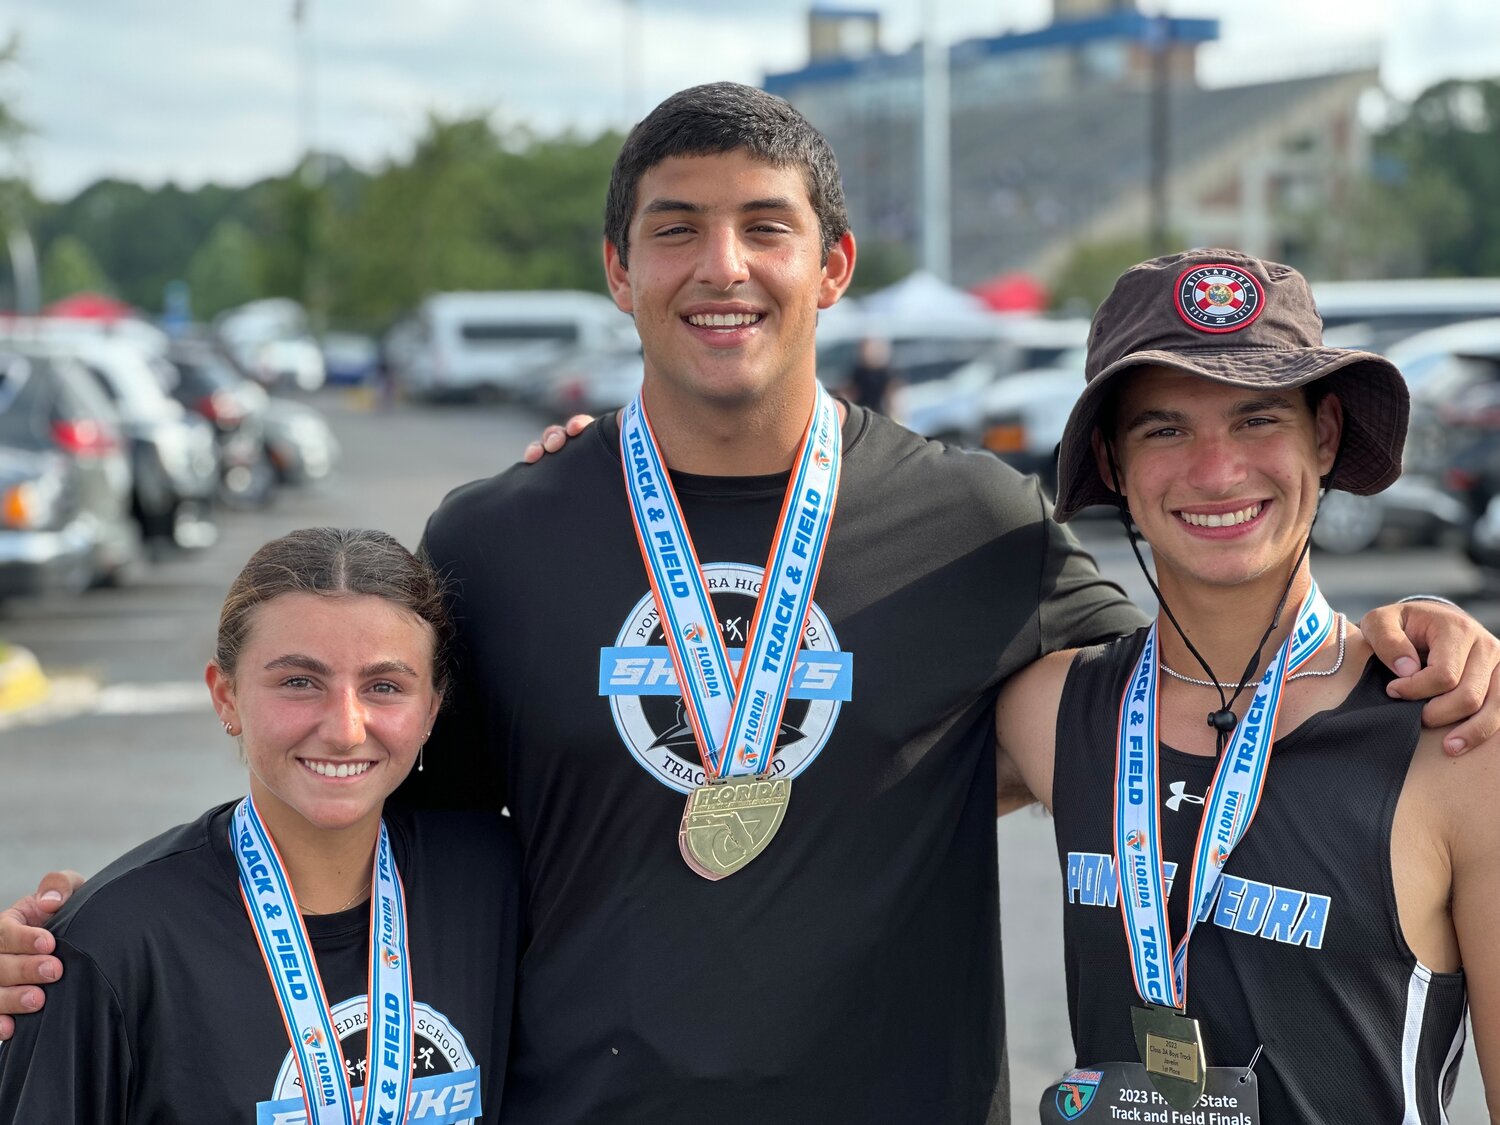 The Sharks’ three individual gold medalists included Bella Madaffari in girls javelin, Nathan Lebowitz in boys discus, and Vinny Jackson in boys javelin.